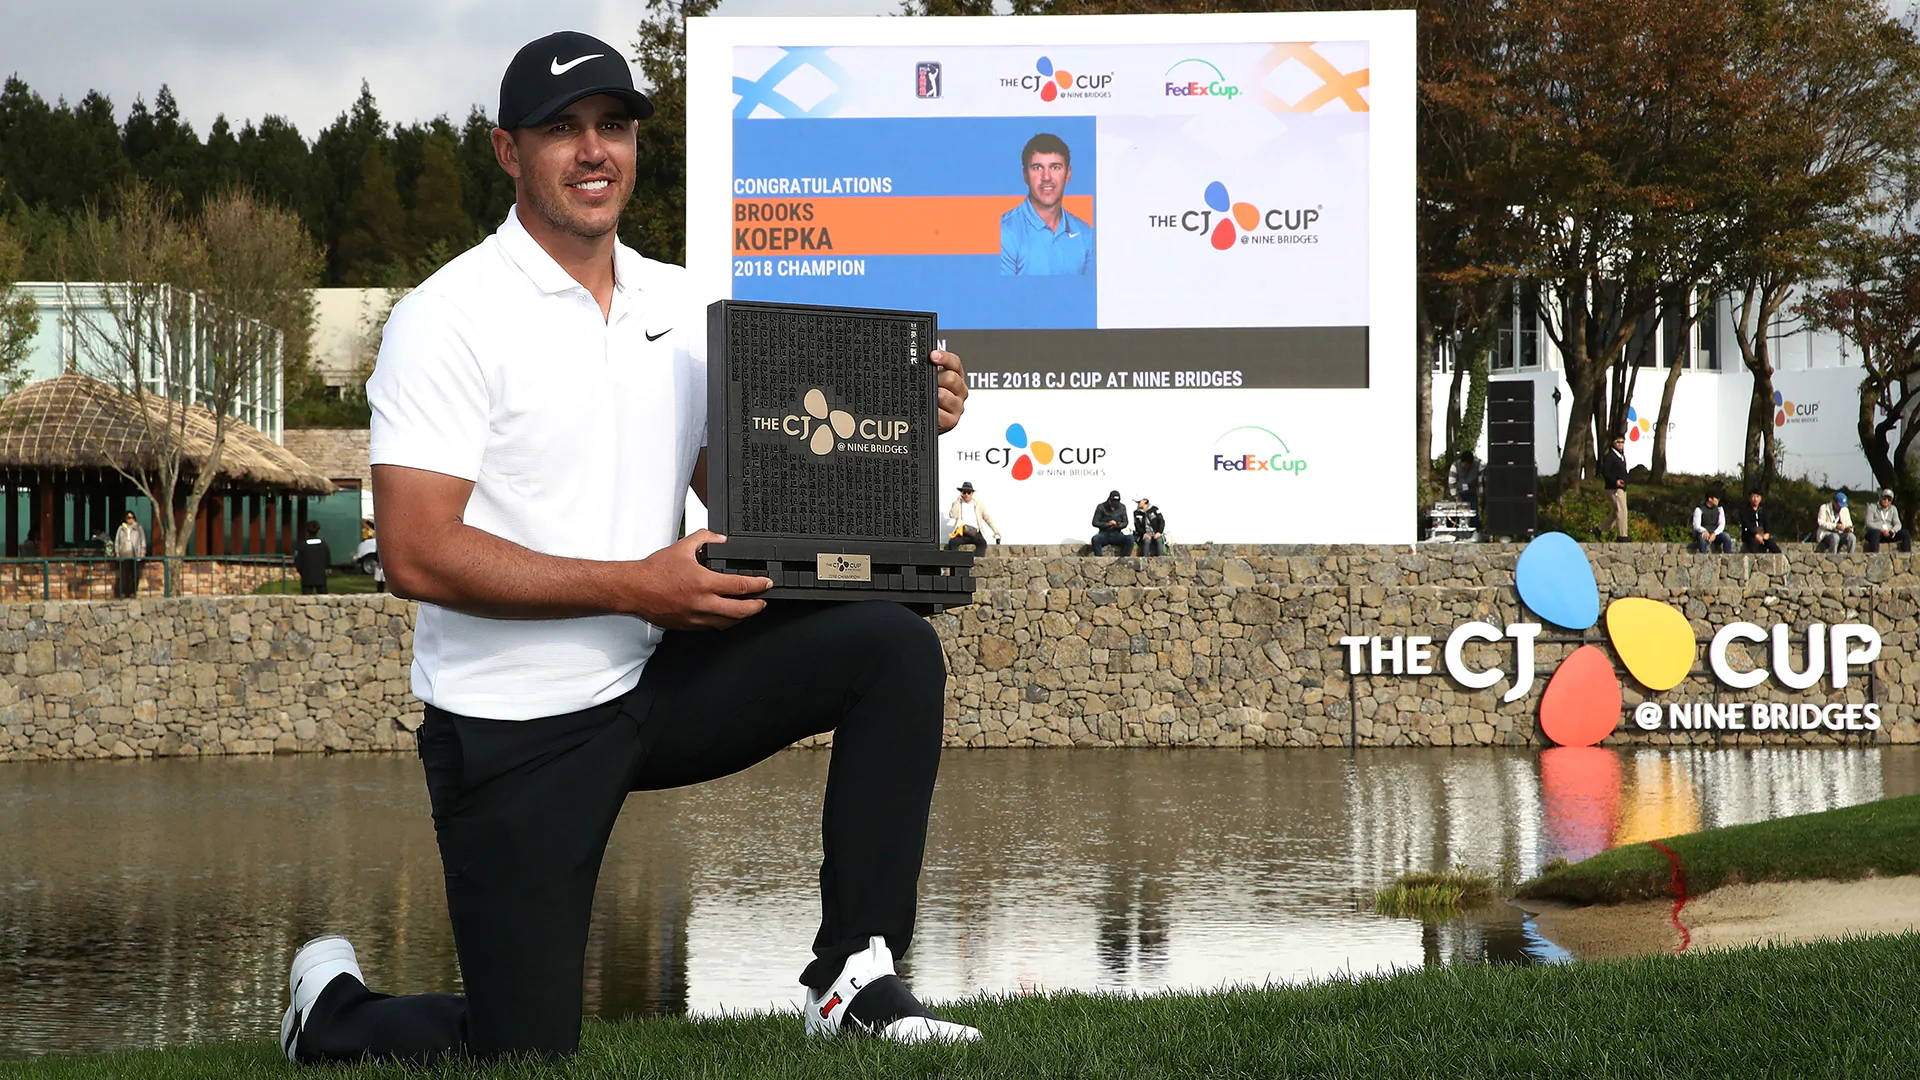 Koepka wins CJ Cup, ascends to world No. 1